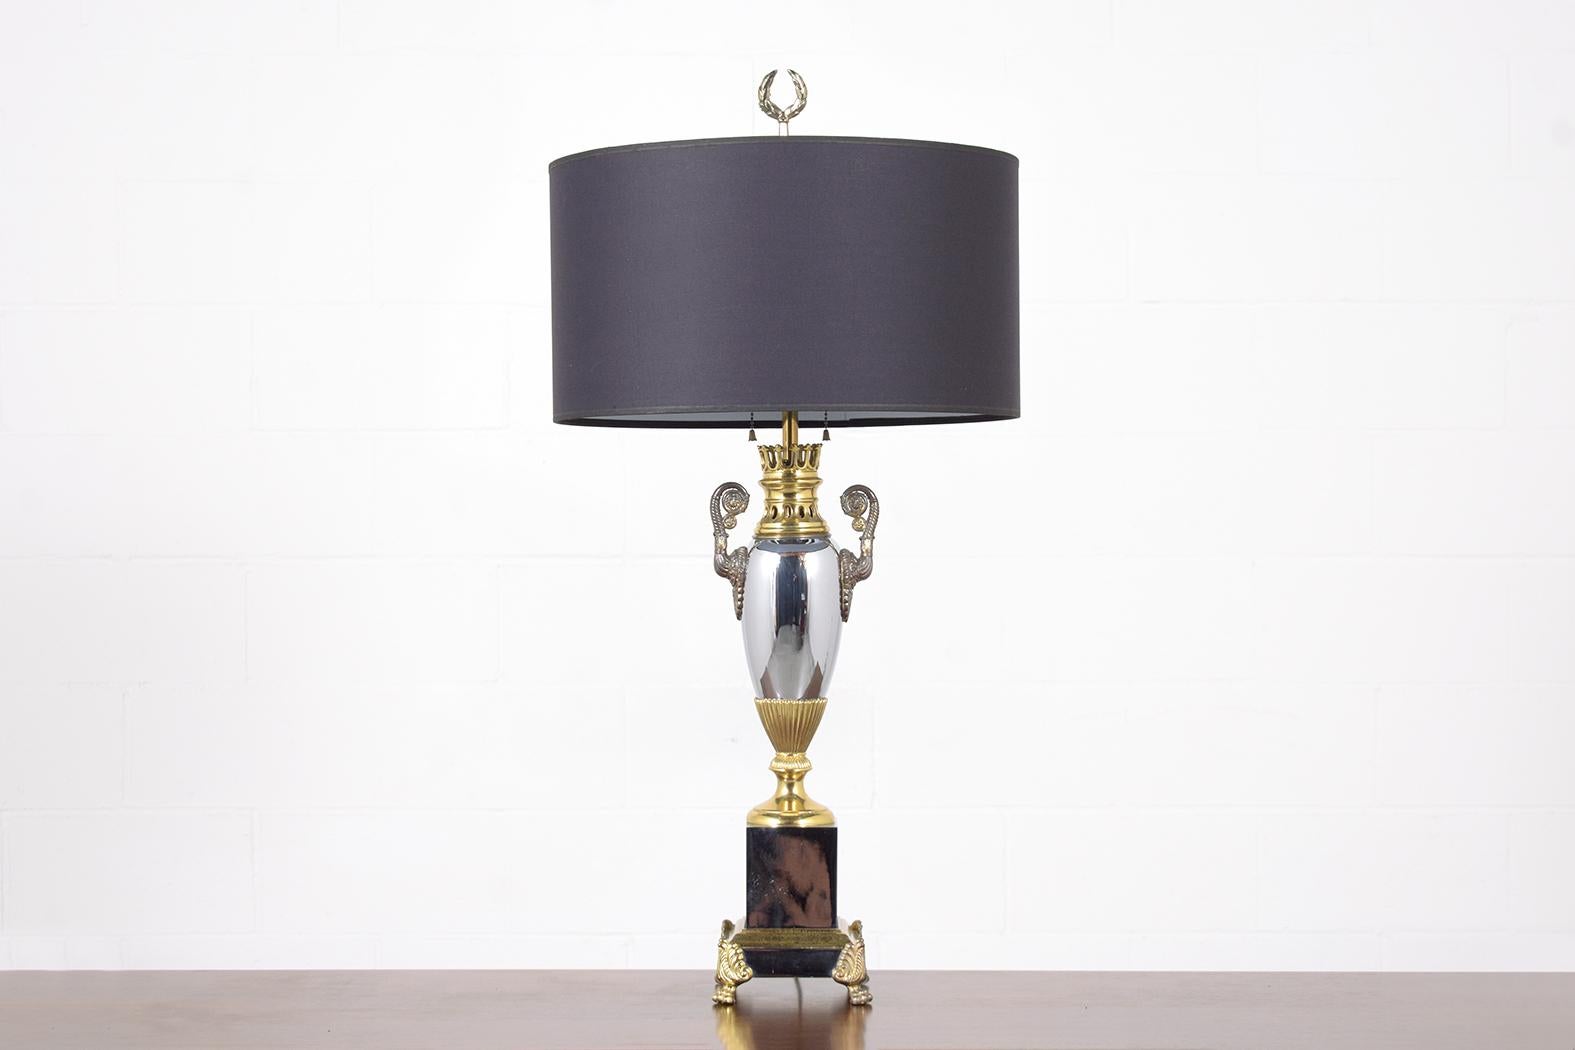 1950s Vintage Regency Style Table Lamps: Silver & Gold Finish with Black Shades In Good Condition For Sale In Los Angeles, CA